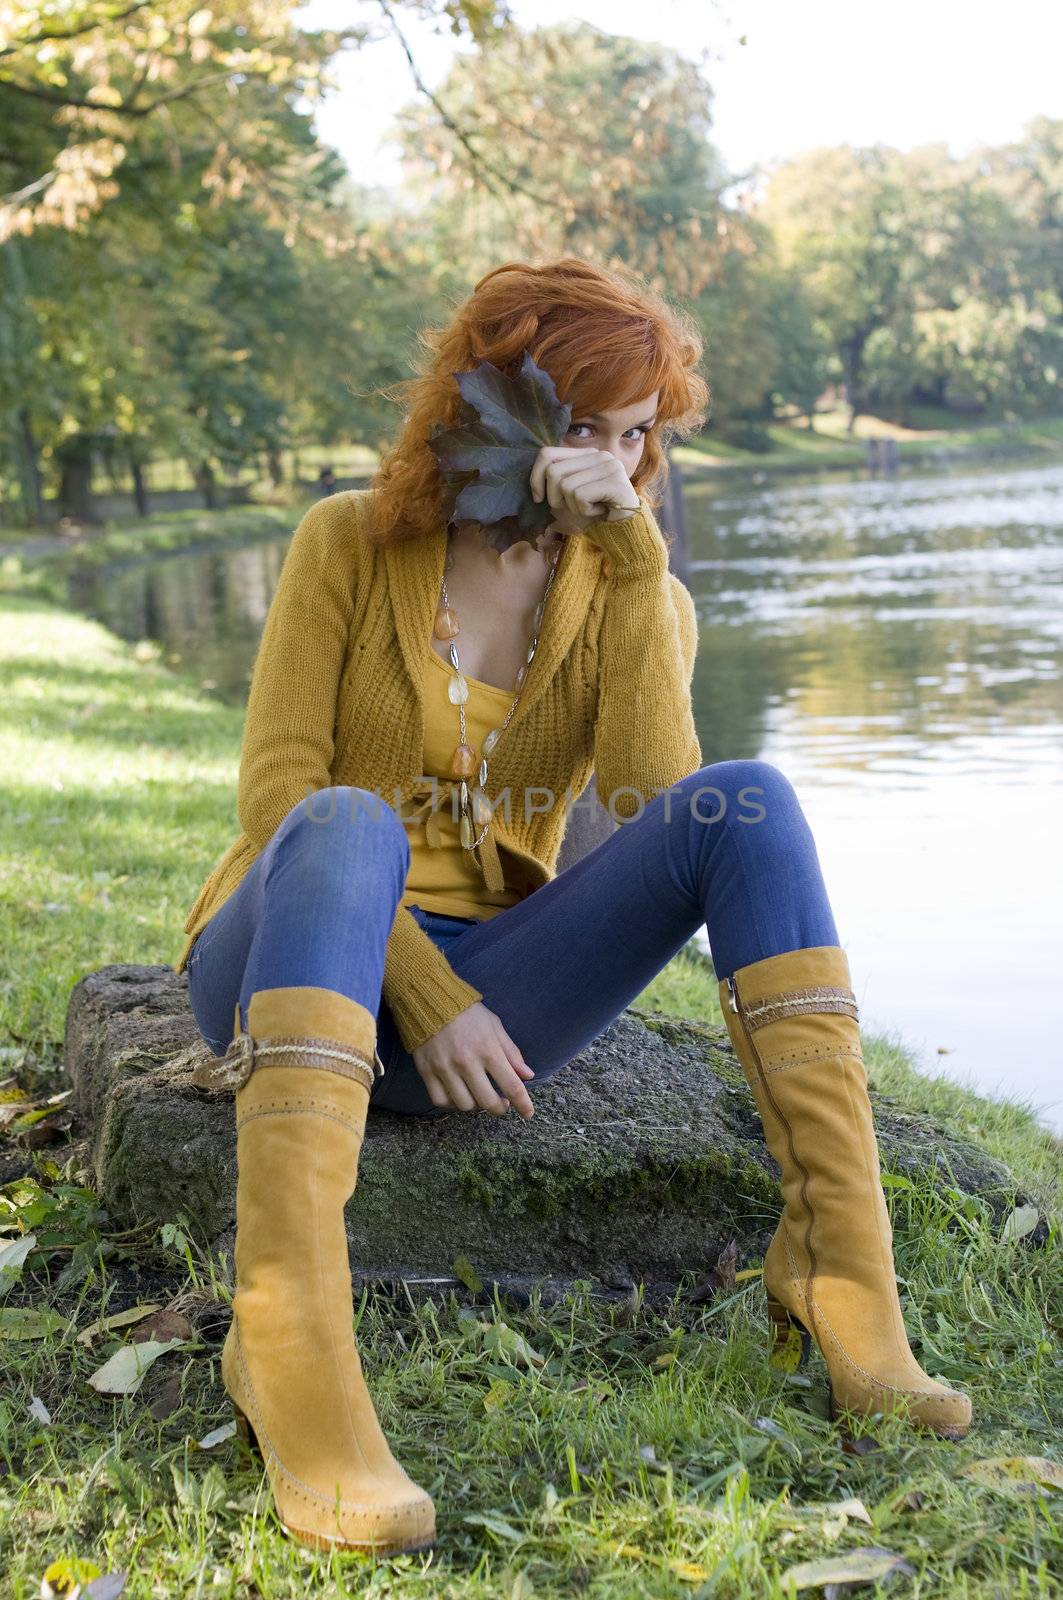 beautiful woman sitting near river playing with some leaves in autumn